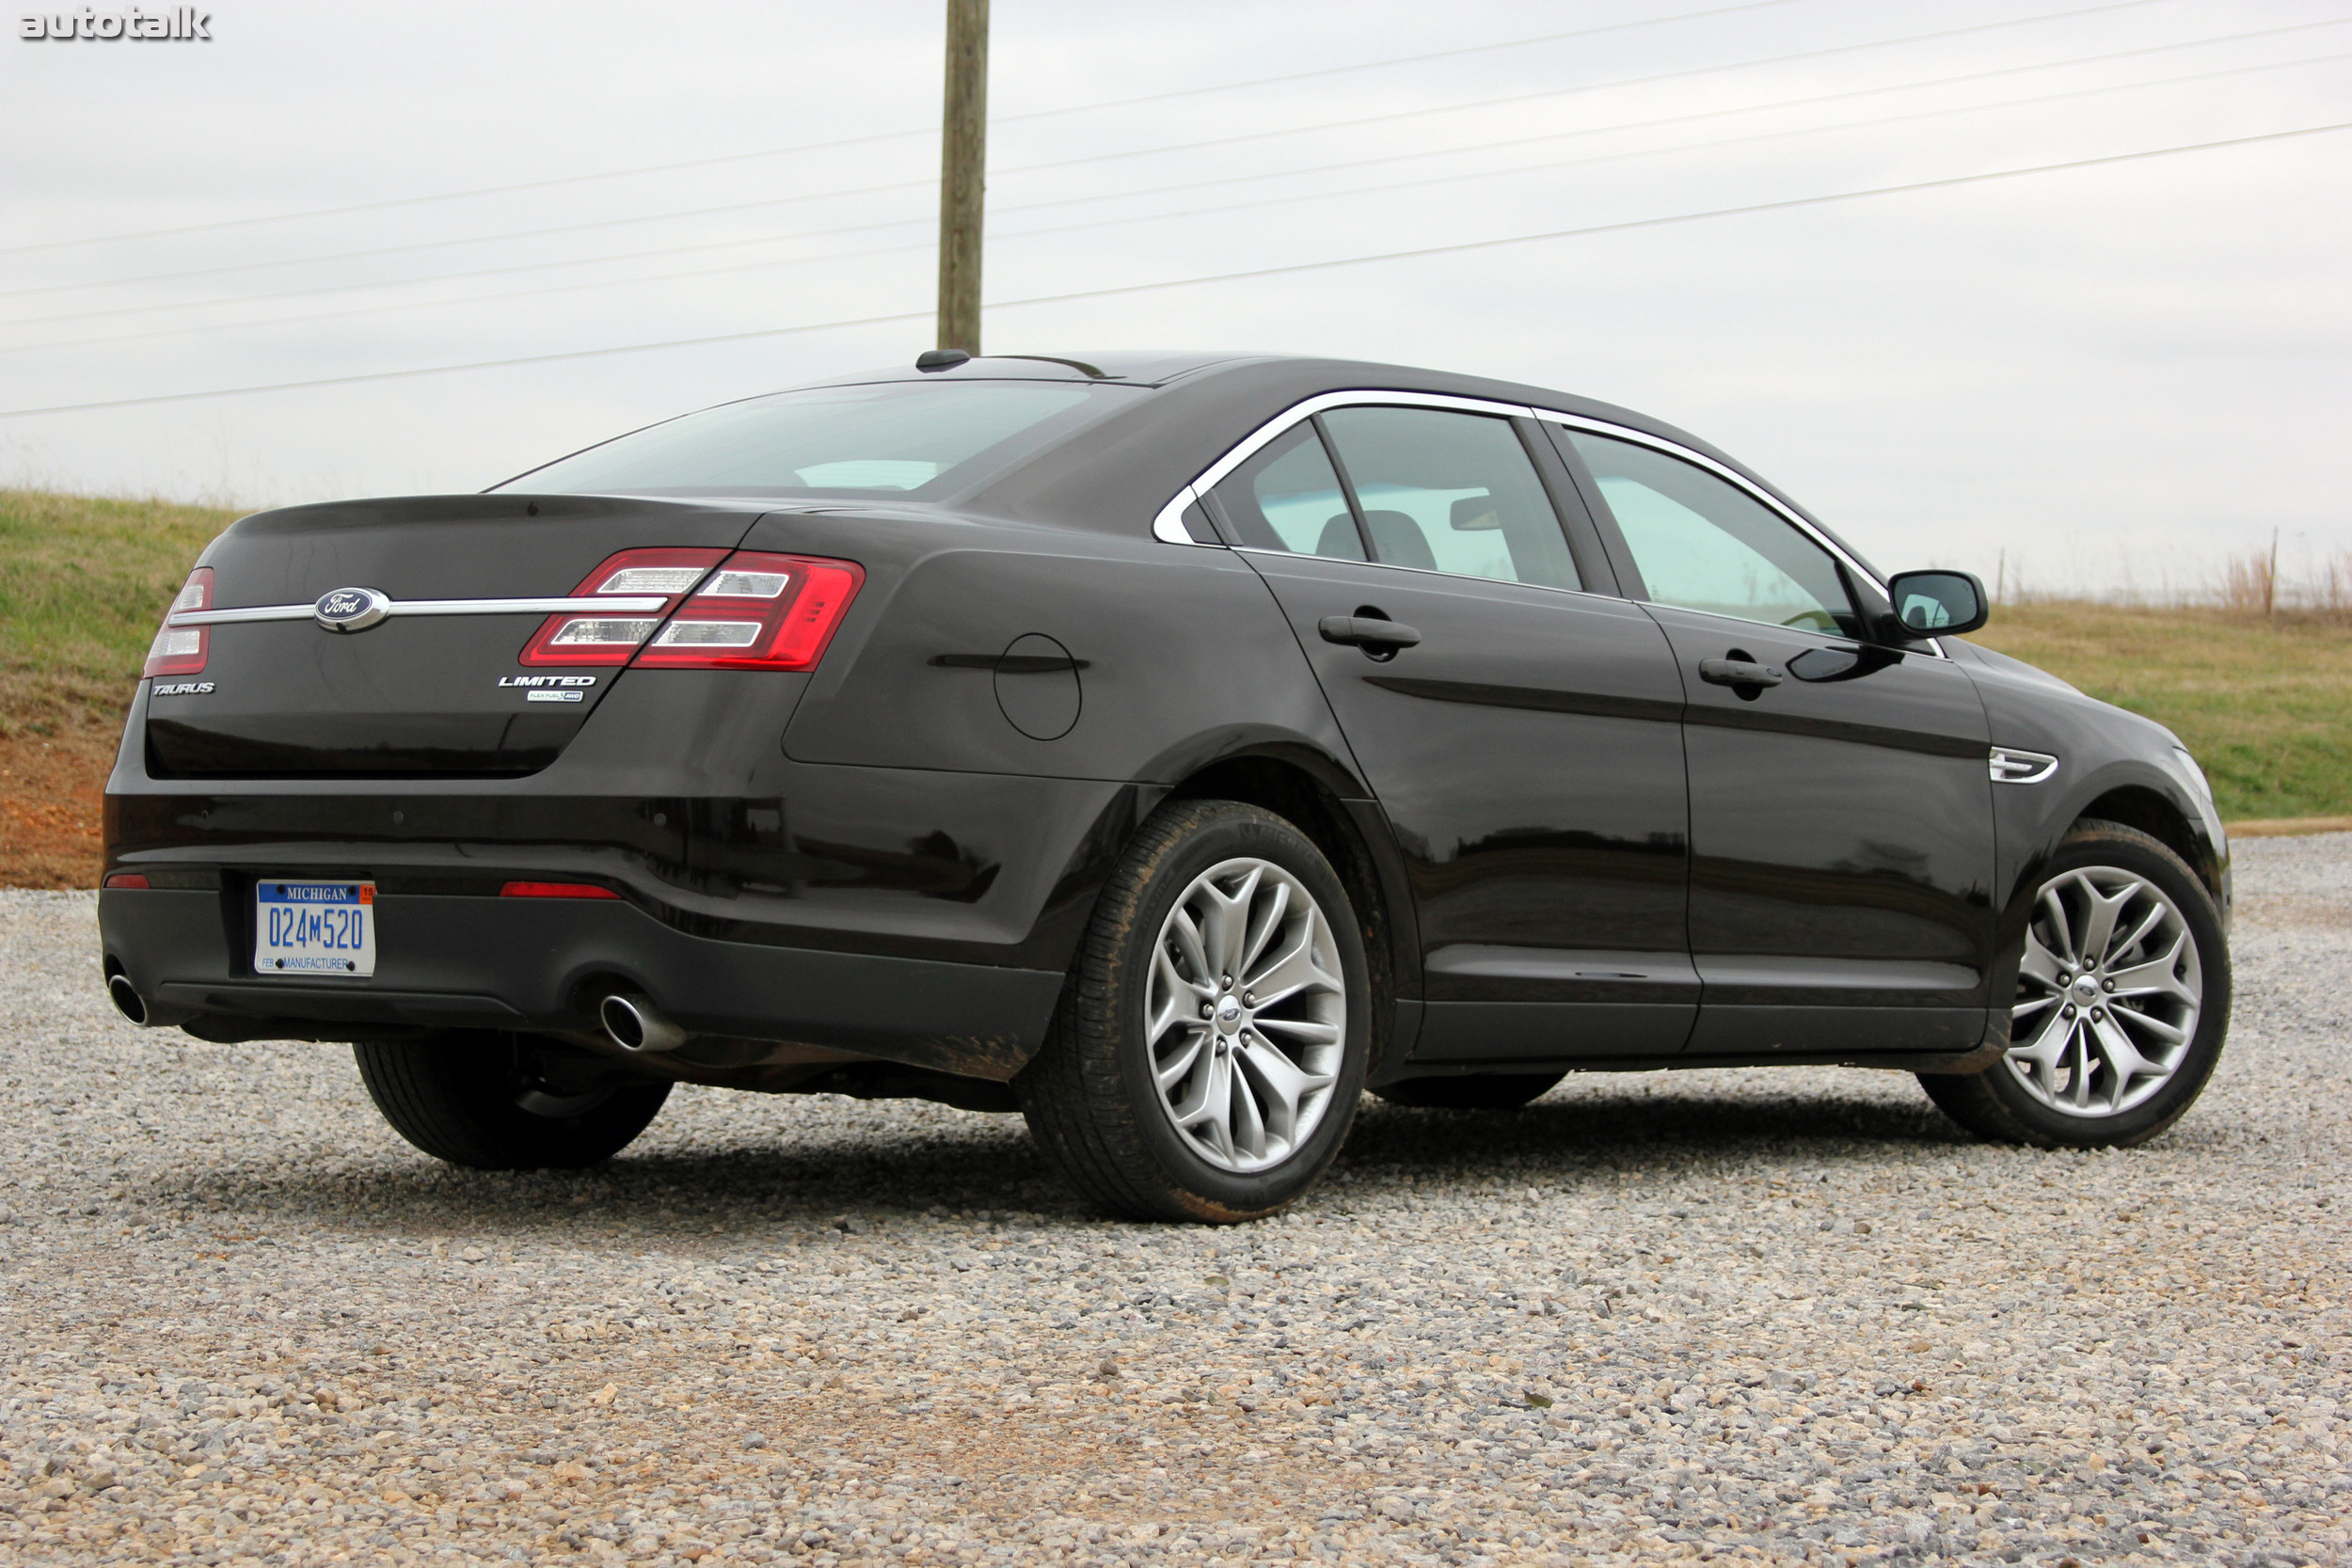 2013 Ford Taurus Review